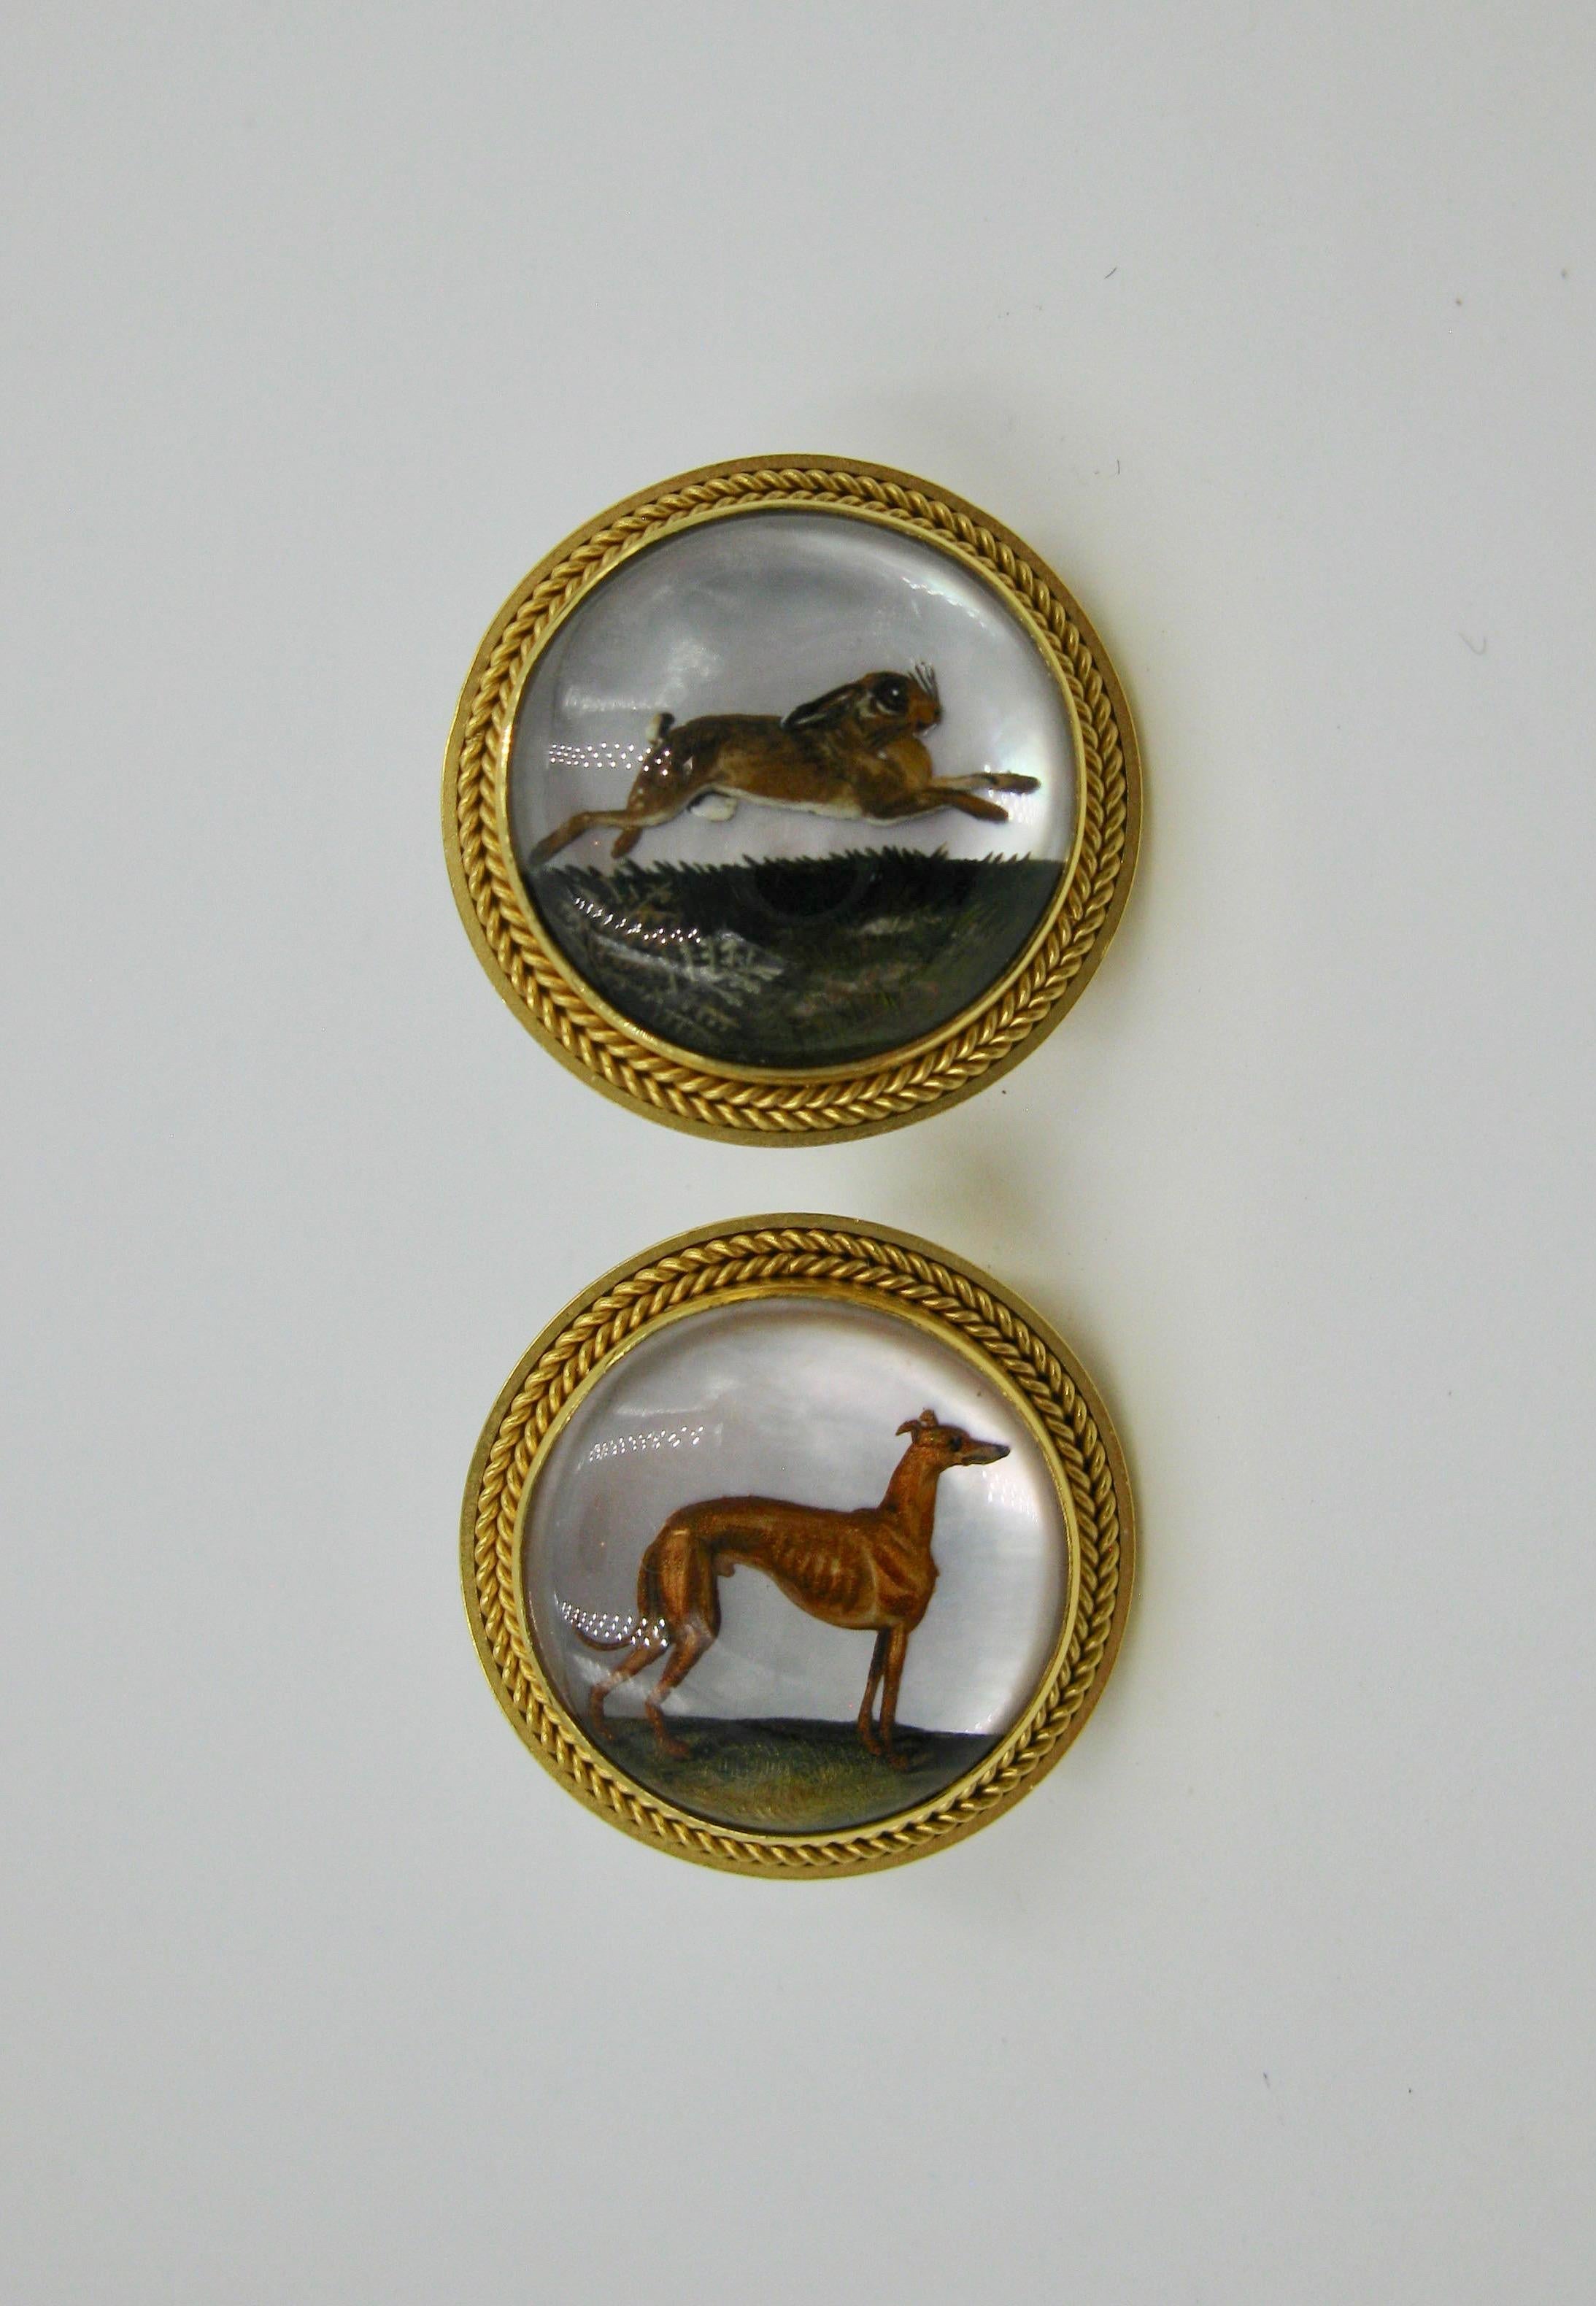 A gorgeous and very rare pair of large one inch Antique Victorian Etruscan Revival Essex Crystal Earrings with images of a dog and a rabbit, or hound and hare and set in 15 Karat Gold.  These are spectacular Museum Quality earrings.  The Essex